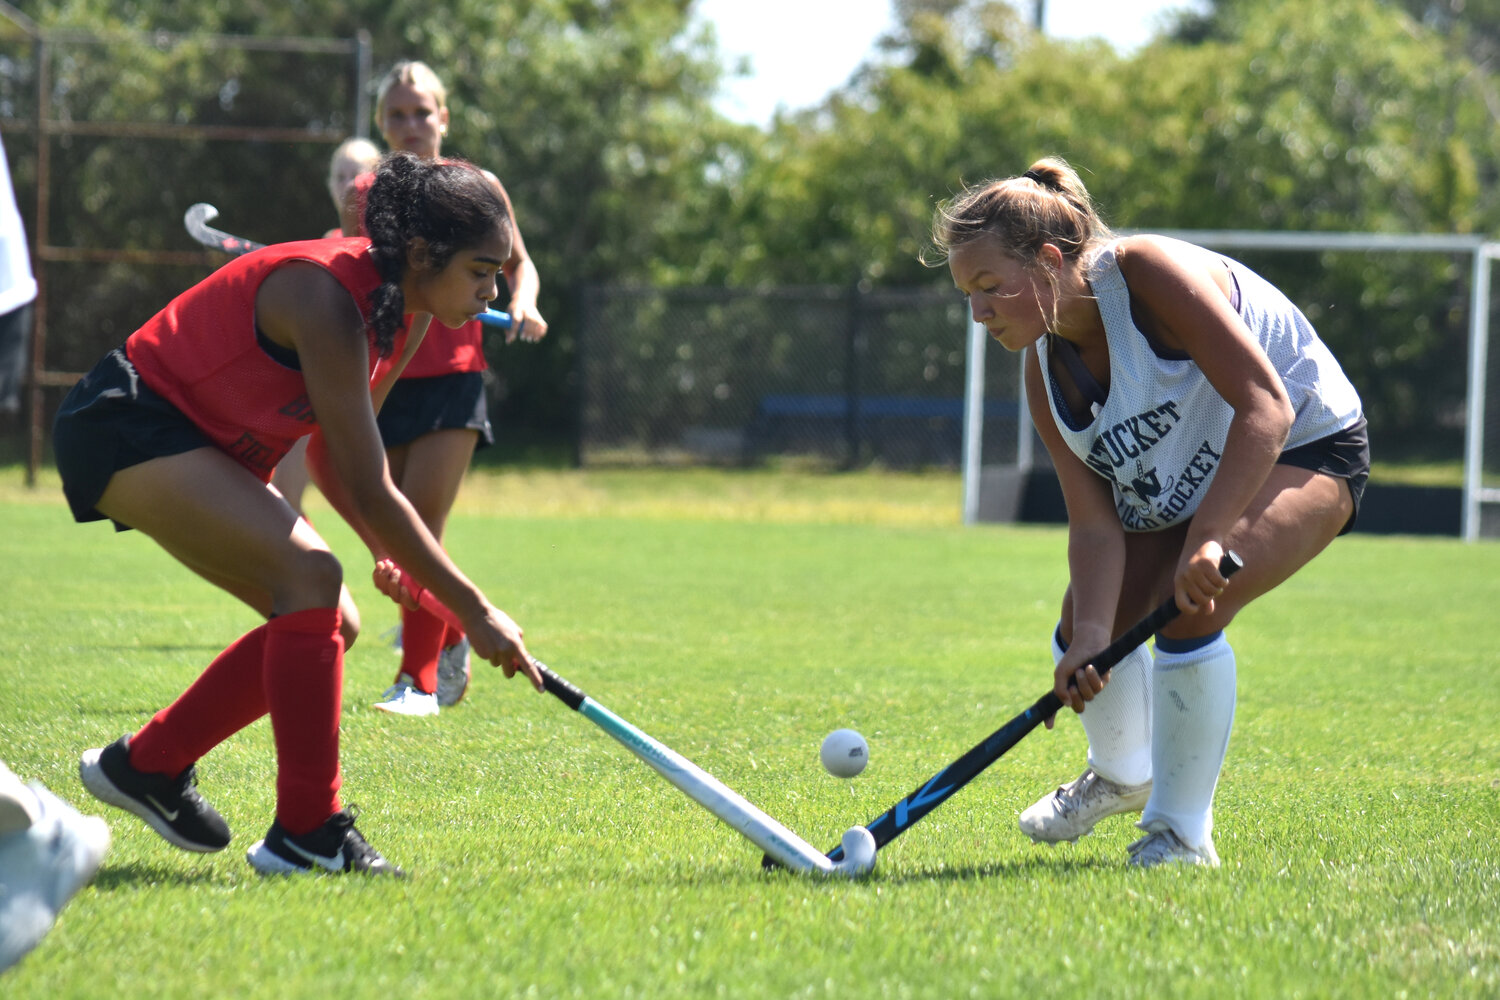 Suz Peraner and a Barnstable player reach for the ball during Friday's scrimmage.